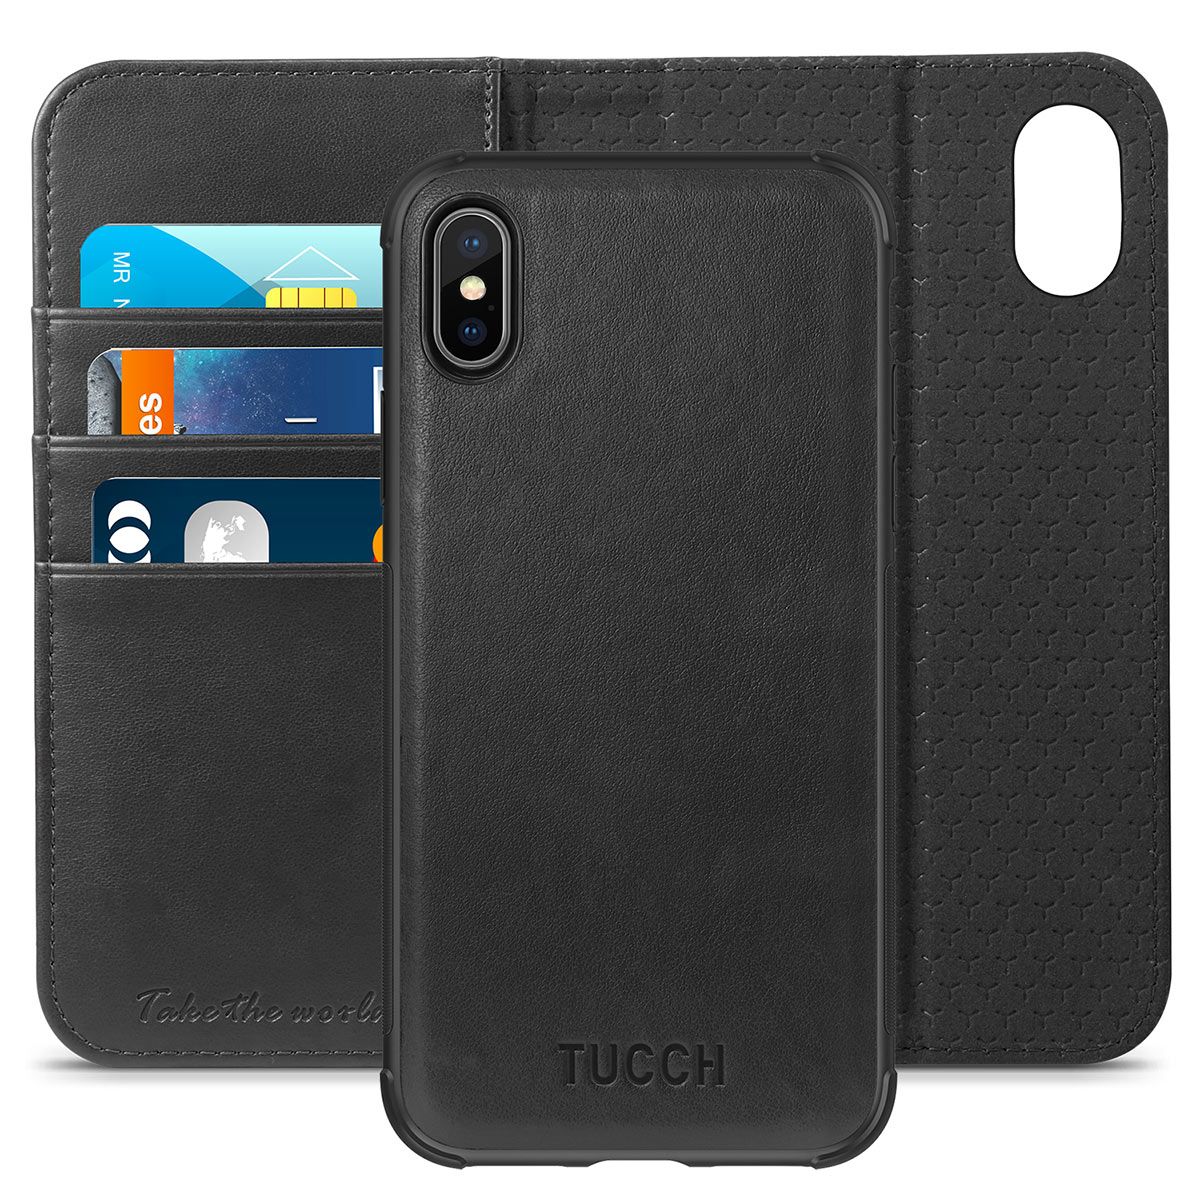 TUCCH iPhone XS Max Leather Wallet Case, iPhone XS Max Detachable Case, 2IN1 Folio / Flip Cover ...